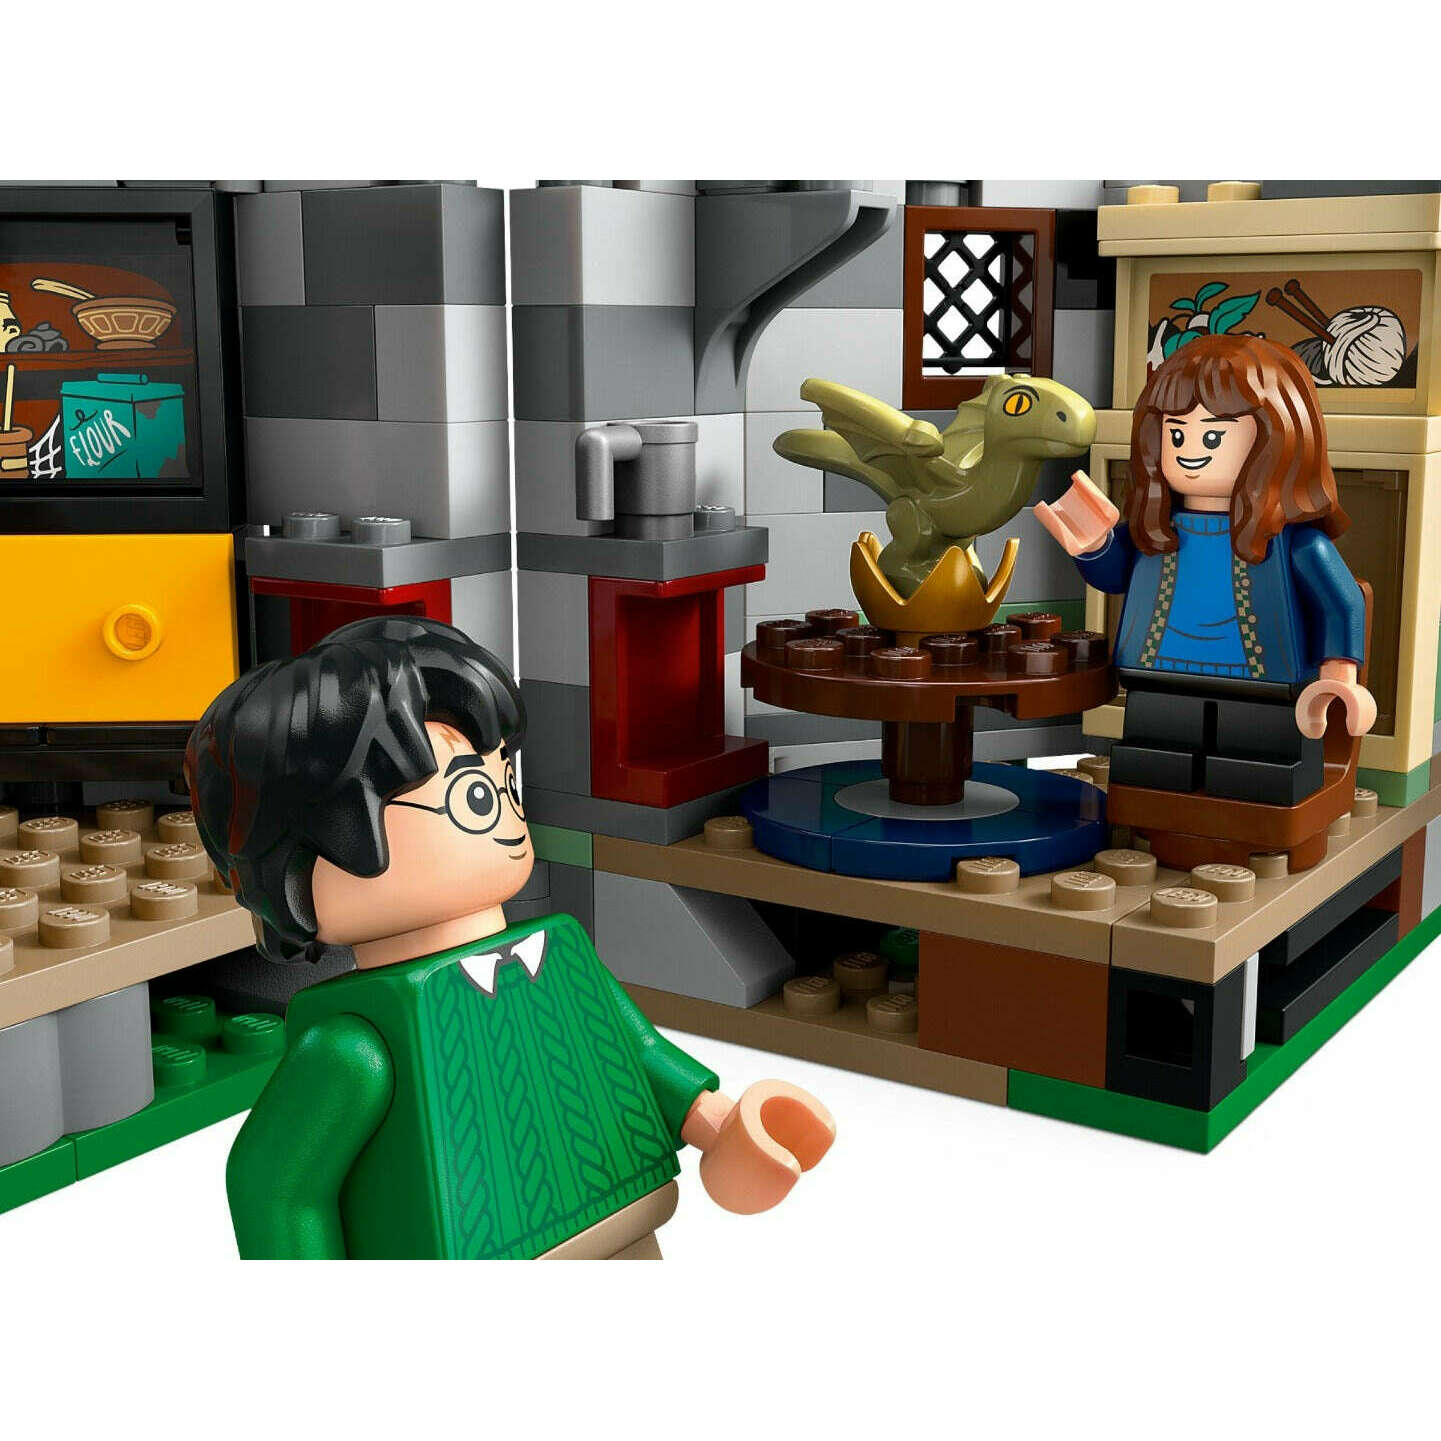 Toys N Tuck:Lego 76428 Harry Potter Hagrid's Hut: An Unexpected Visit,Lego Harry Potter